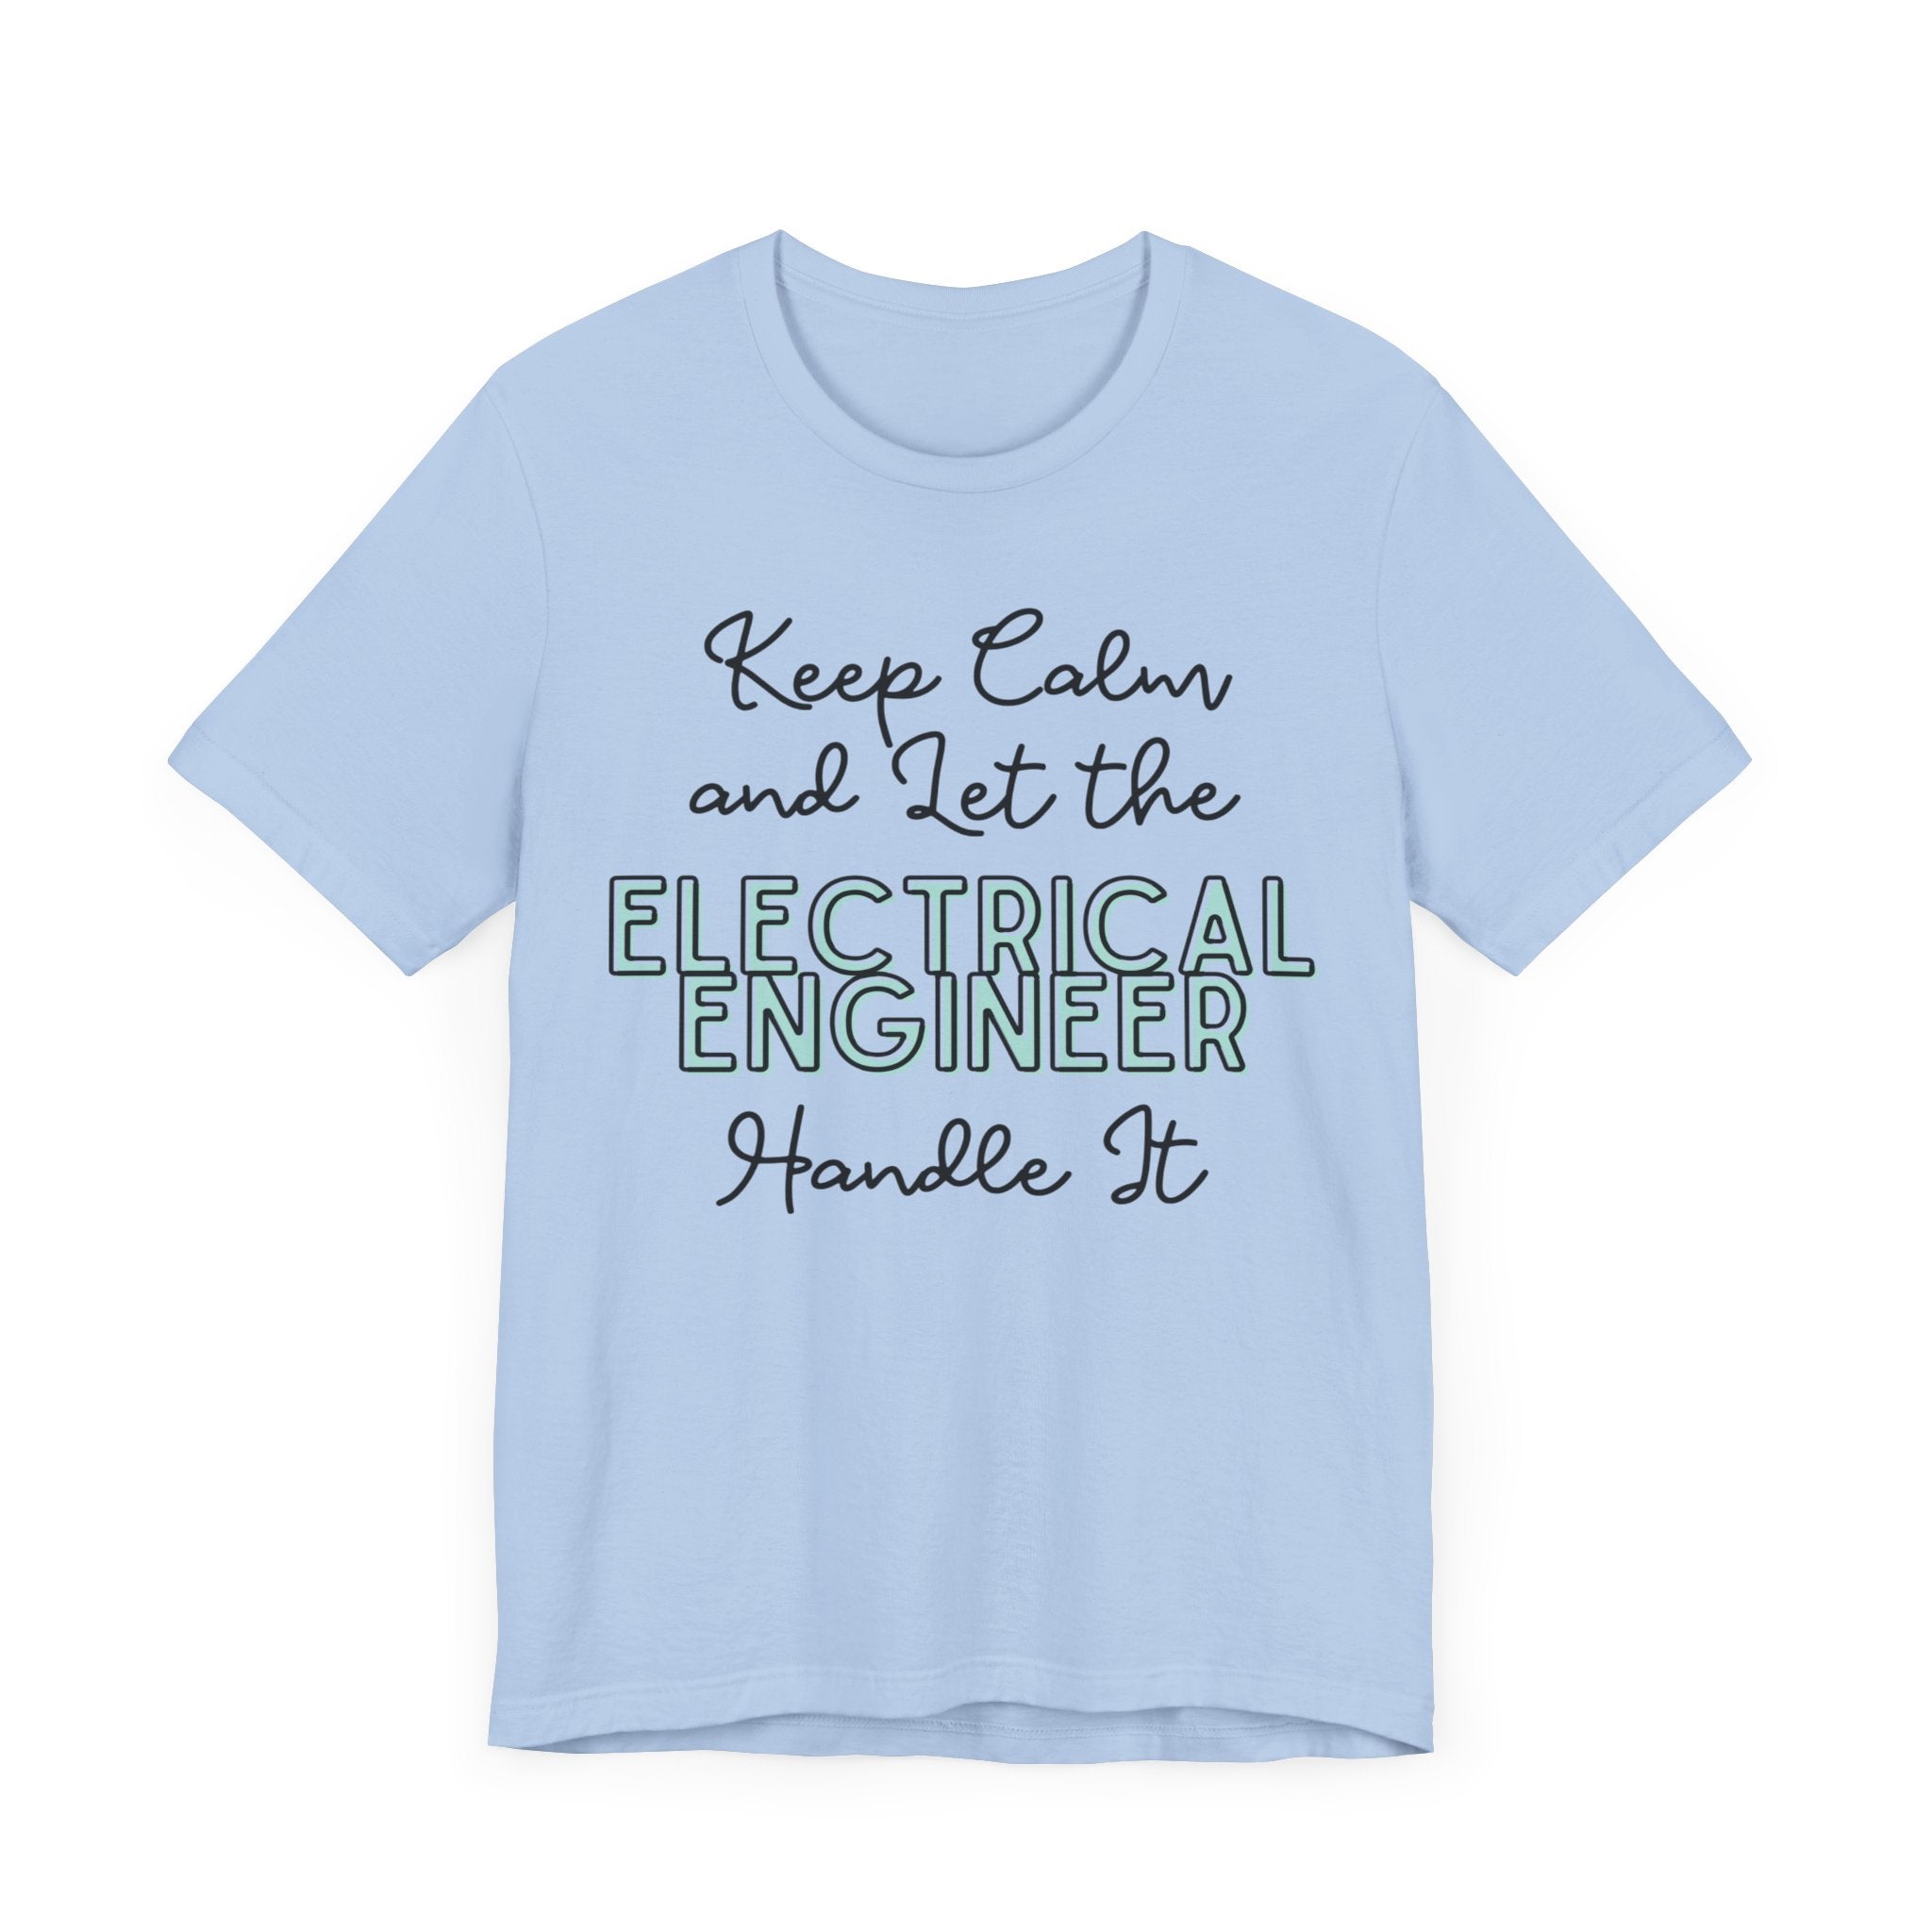 Keep Calm and let the Electrical Engineer handle It - Jersey Short Sleeve Tee